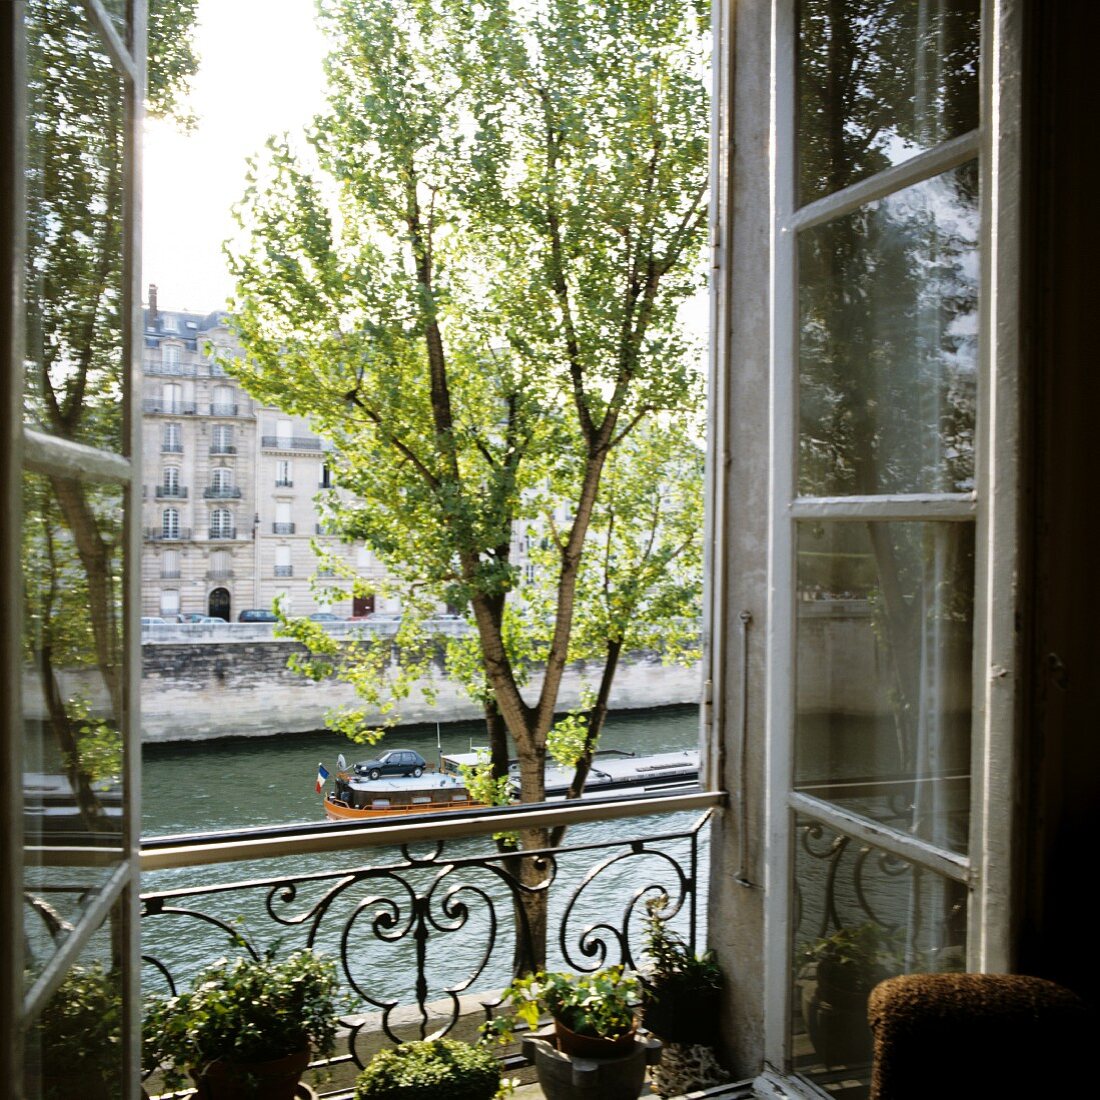 View of the Seine through open French window with wrought iron balustrade